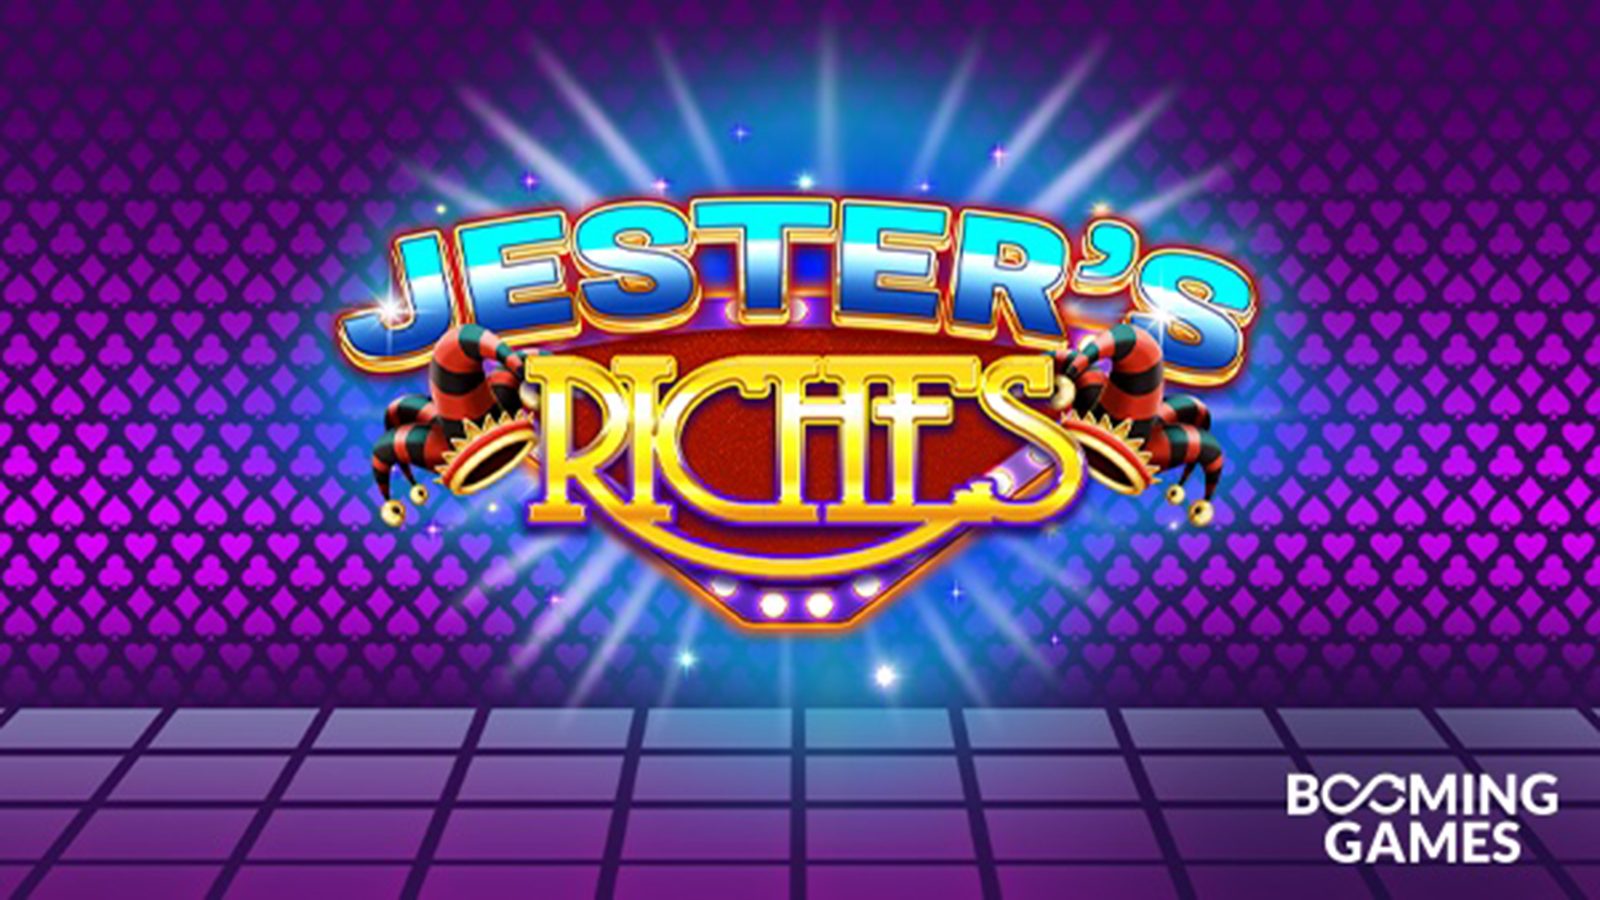 Jester’s Riches Slot by Booming Games